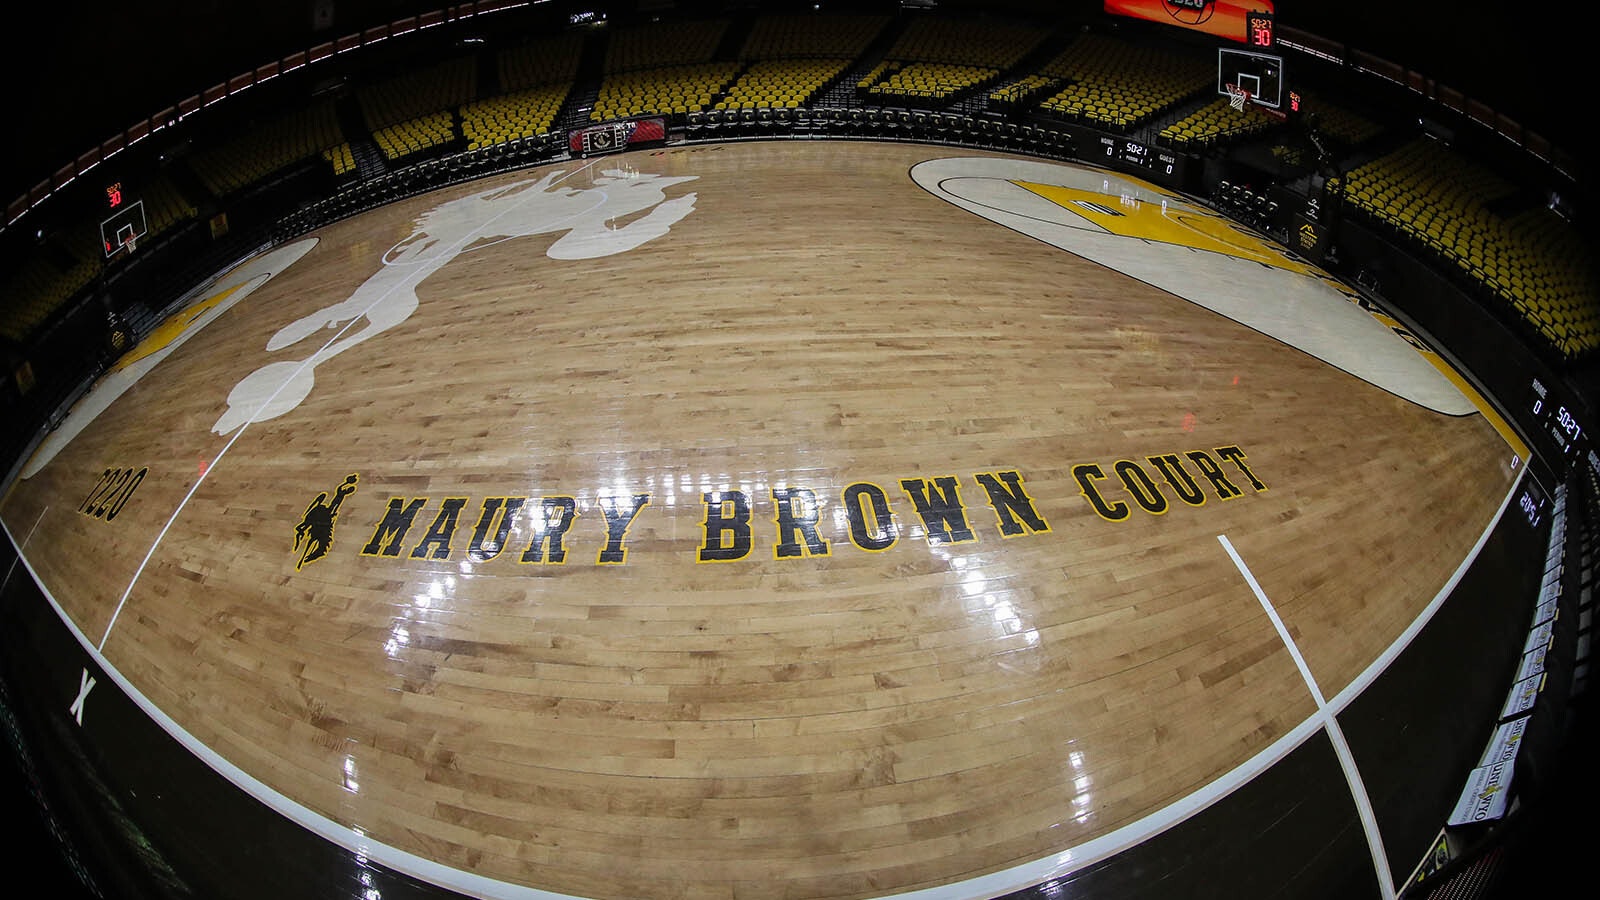 The hardwood at the University of Wyoming is named the Maury Brown Court.